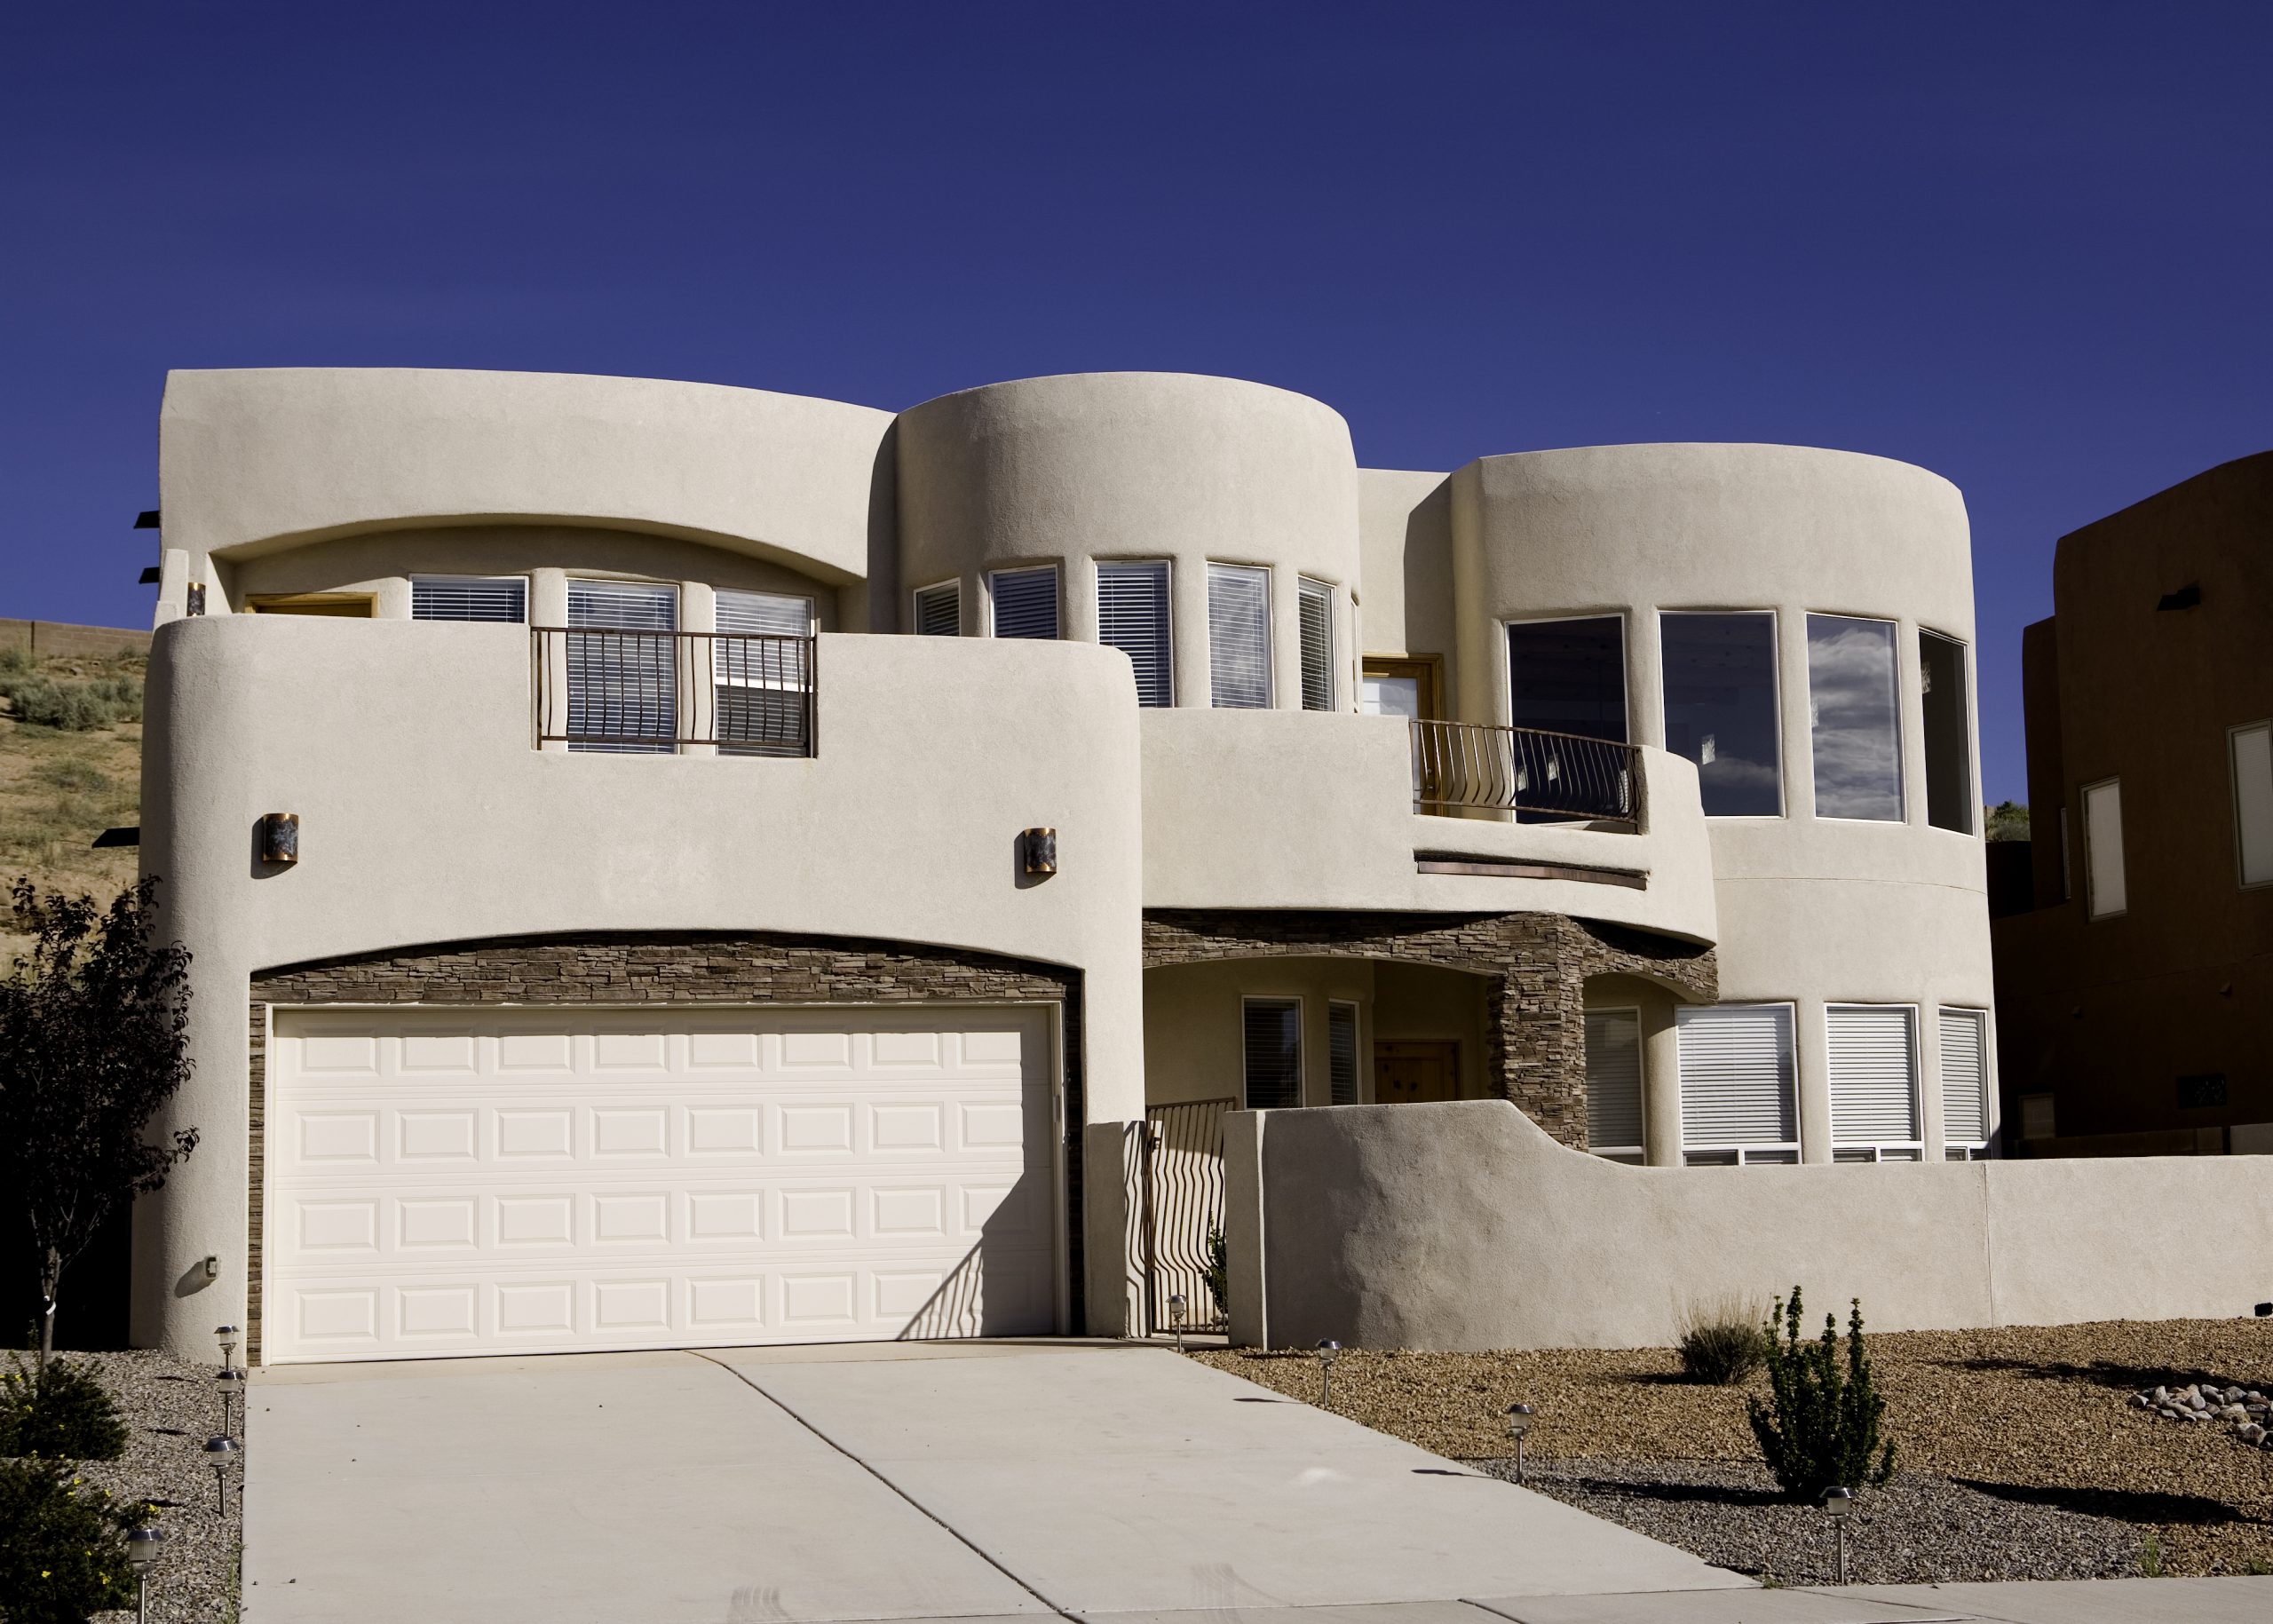 A newer Adobe home located in High Desert, Albuquerque, New Mexico.